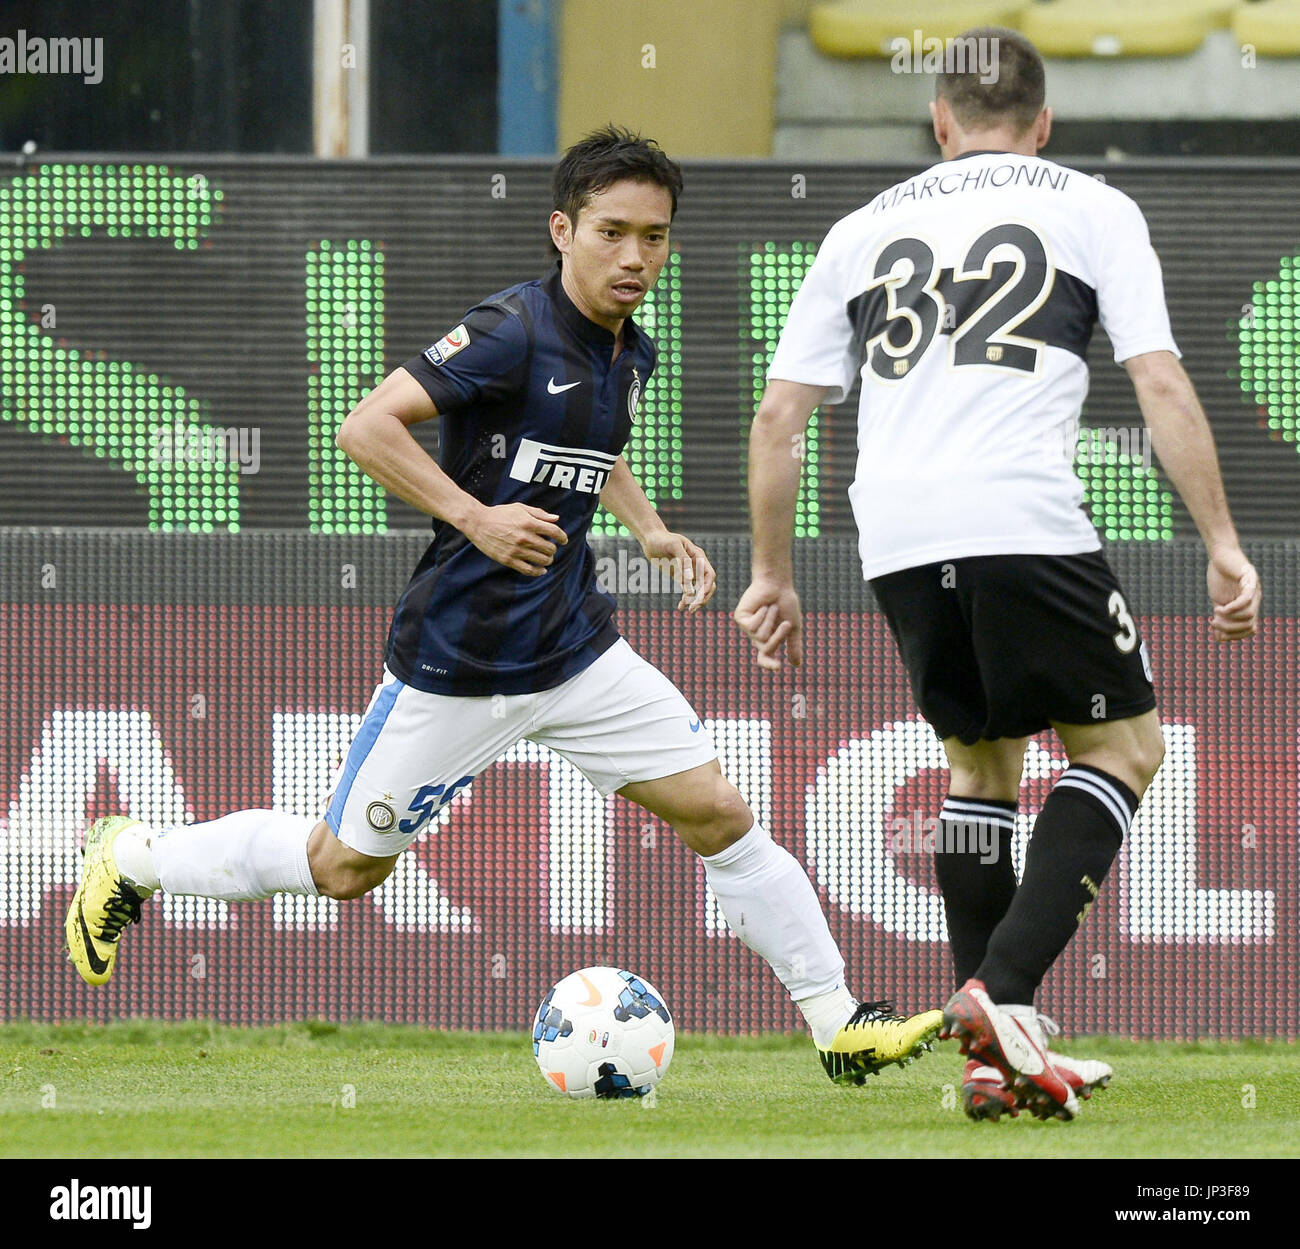 PARMA, Italy - Inter Milan's Yuto Nagatomo (L) attempts to get inside against Parma's Marco Marchionni in the first half of an Italian Serie A soccer match against Parma on April 19, 2014, in Parma, Italy. Inter won 2-0. (Kyodo) Stock Photo